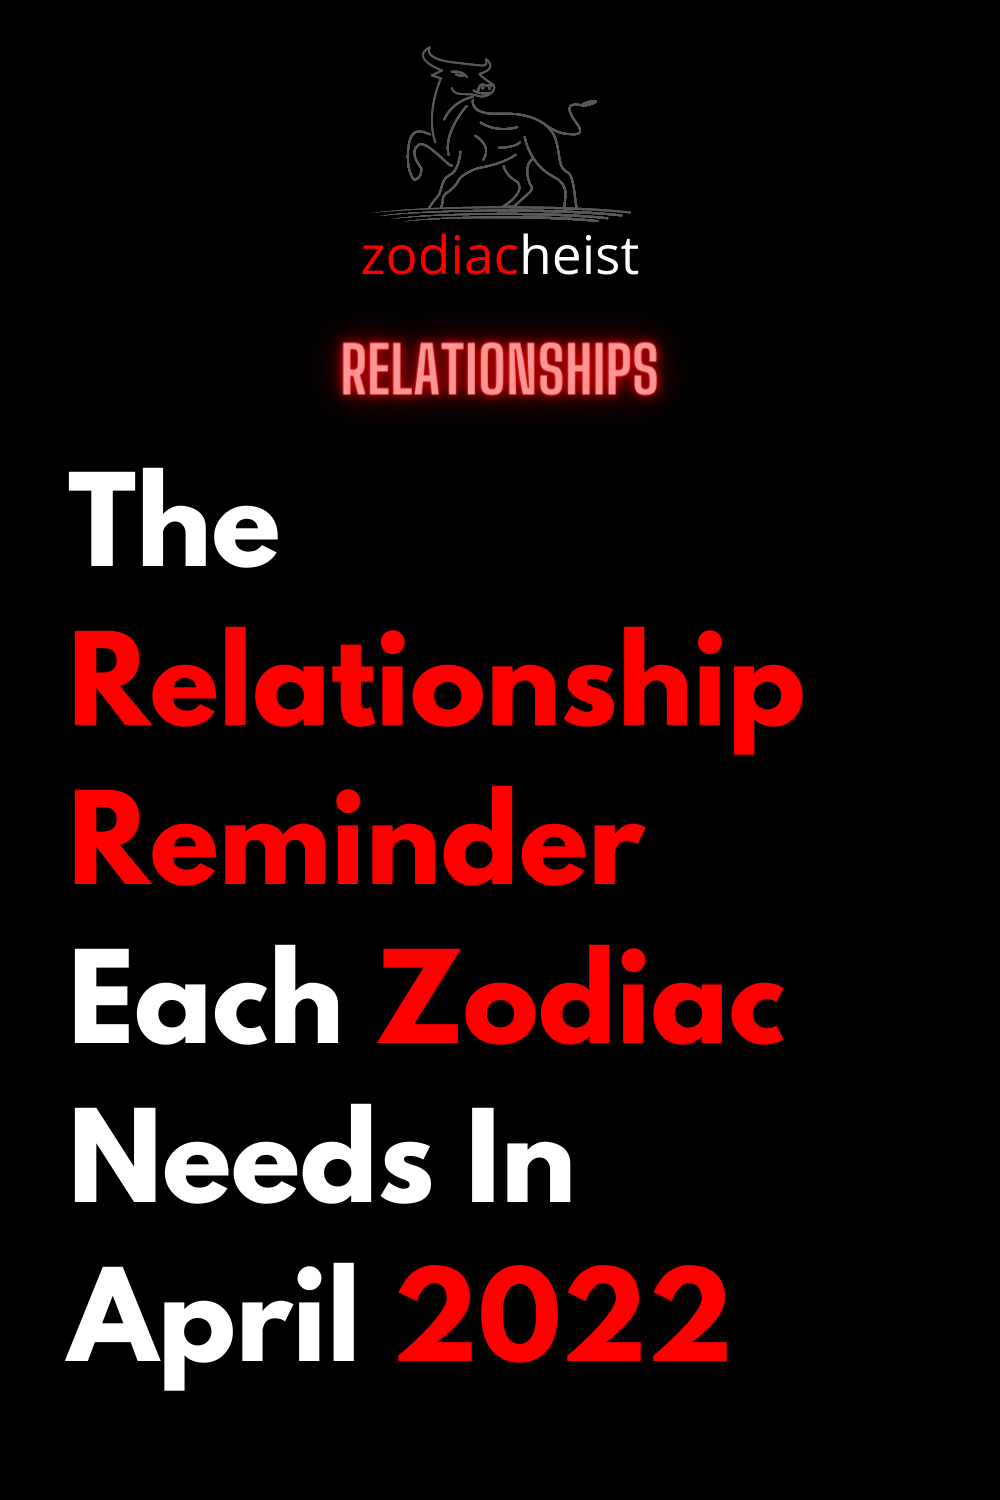 The Relationship Reminder Each Zodiac Needs In April 2022